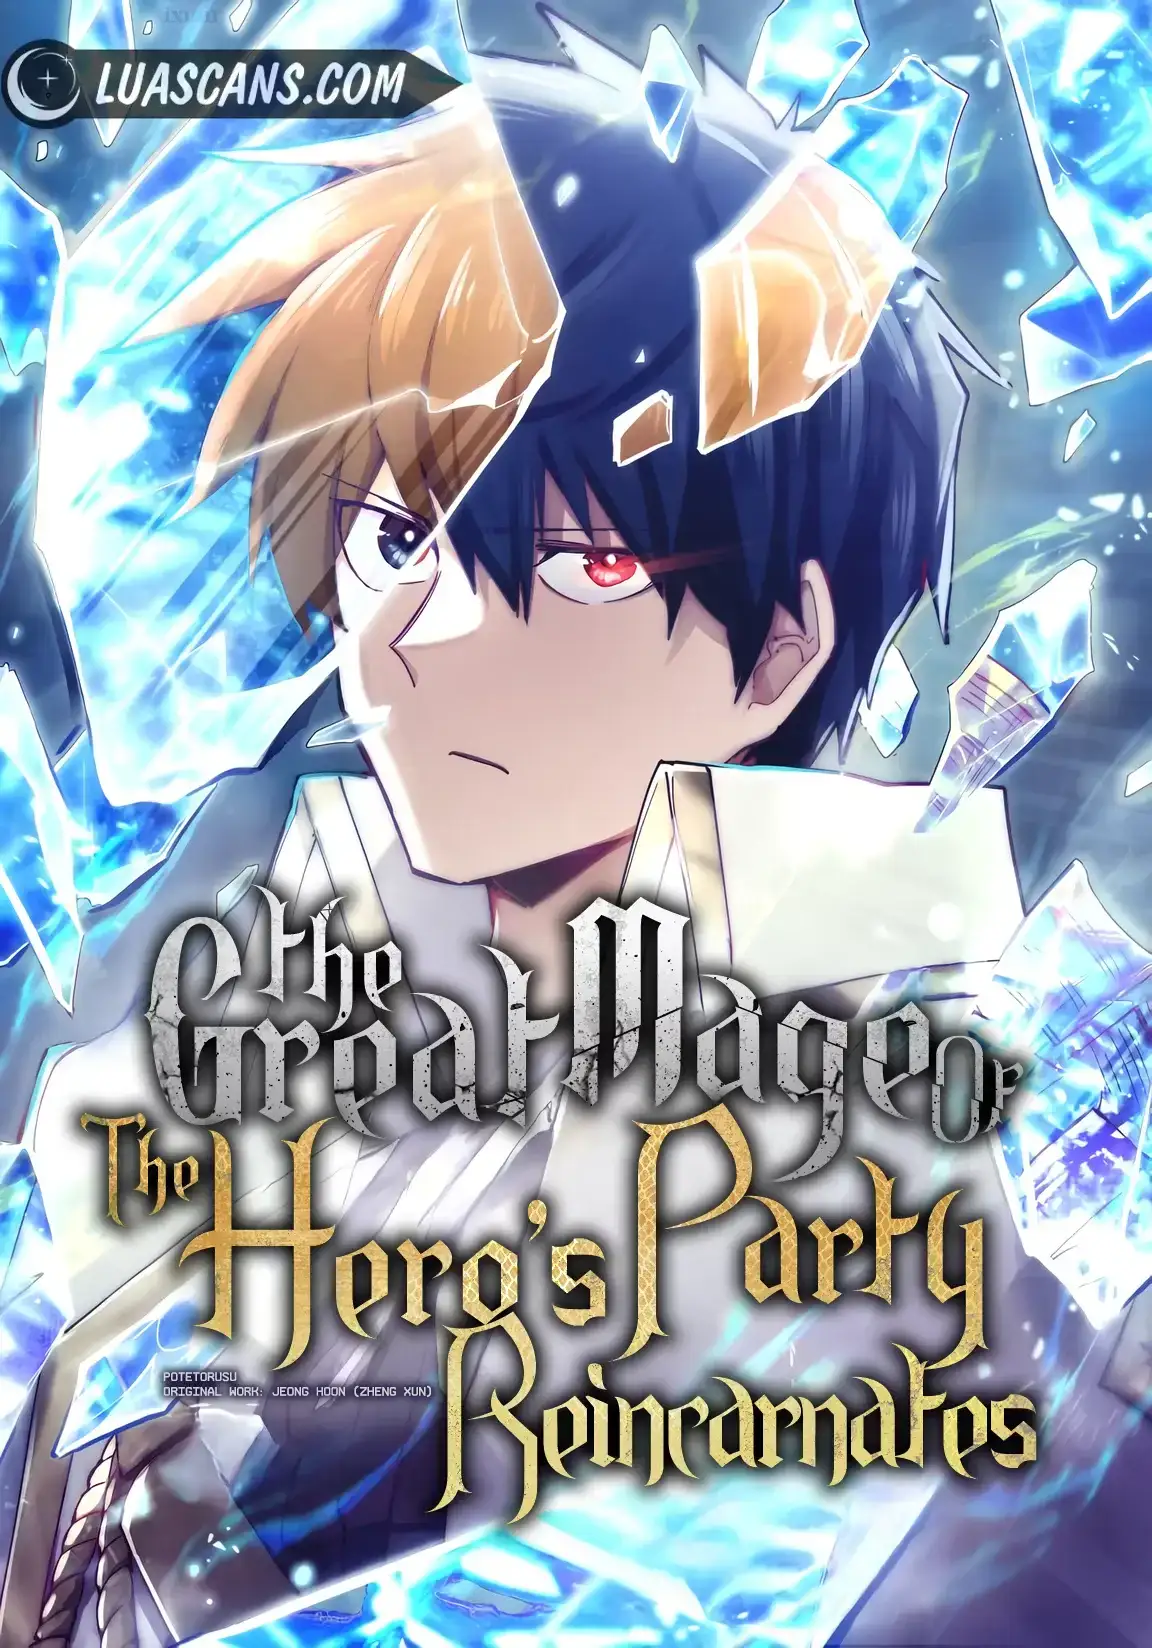 THE GREAT MAGE OF THE HERO'S PARTY REINCARNATES THUMBNAIL